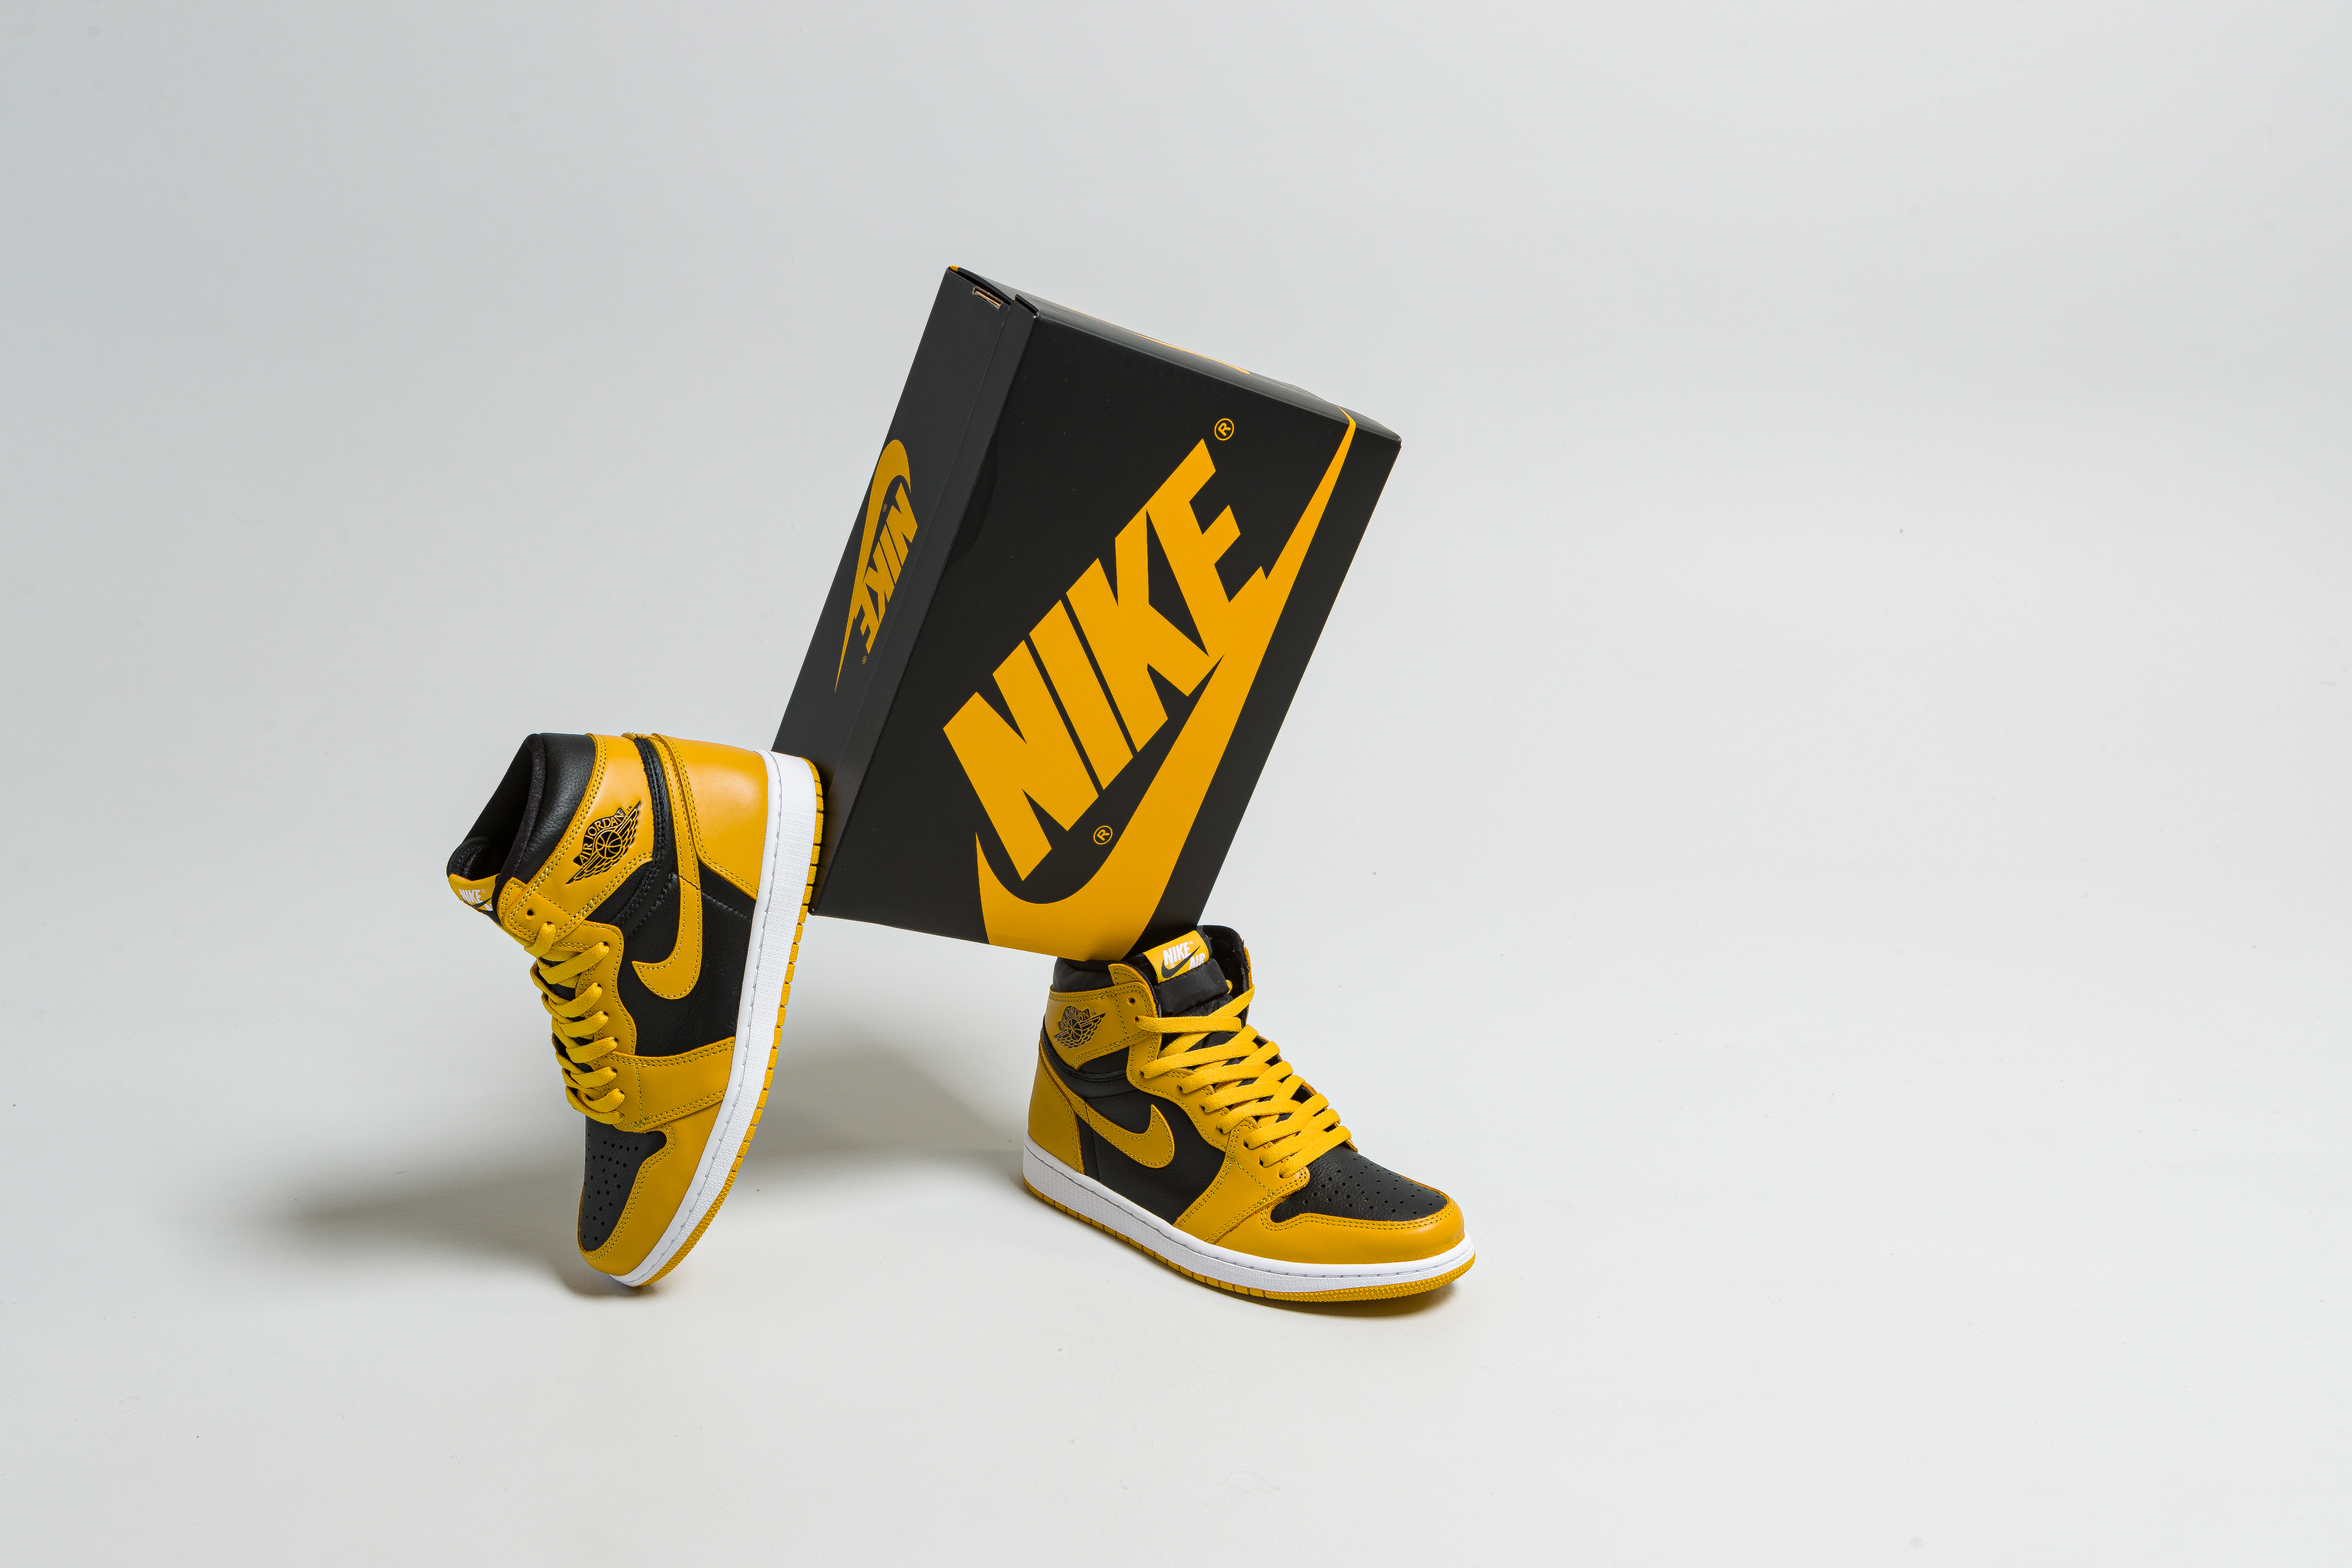 Up There Launches - Nike Air Jordan High Retro OG ’Pollen’